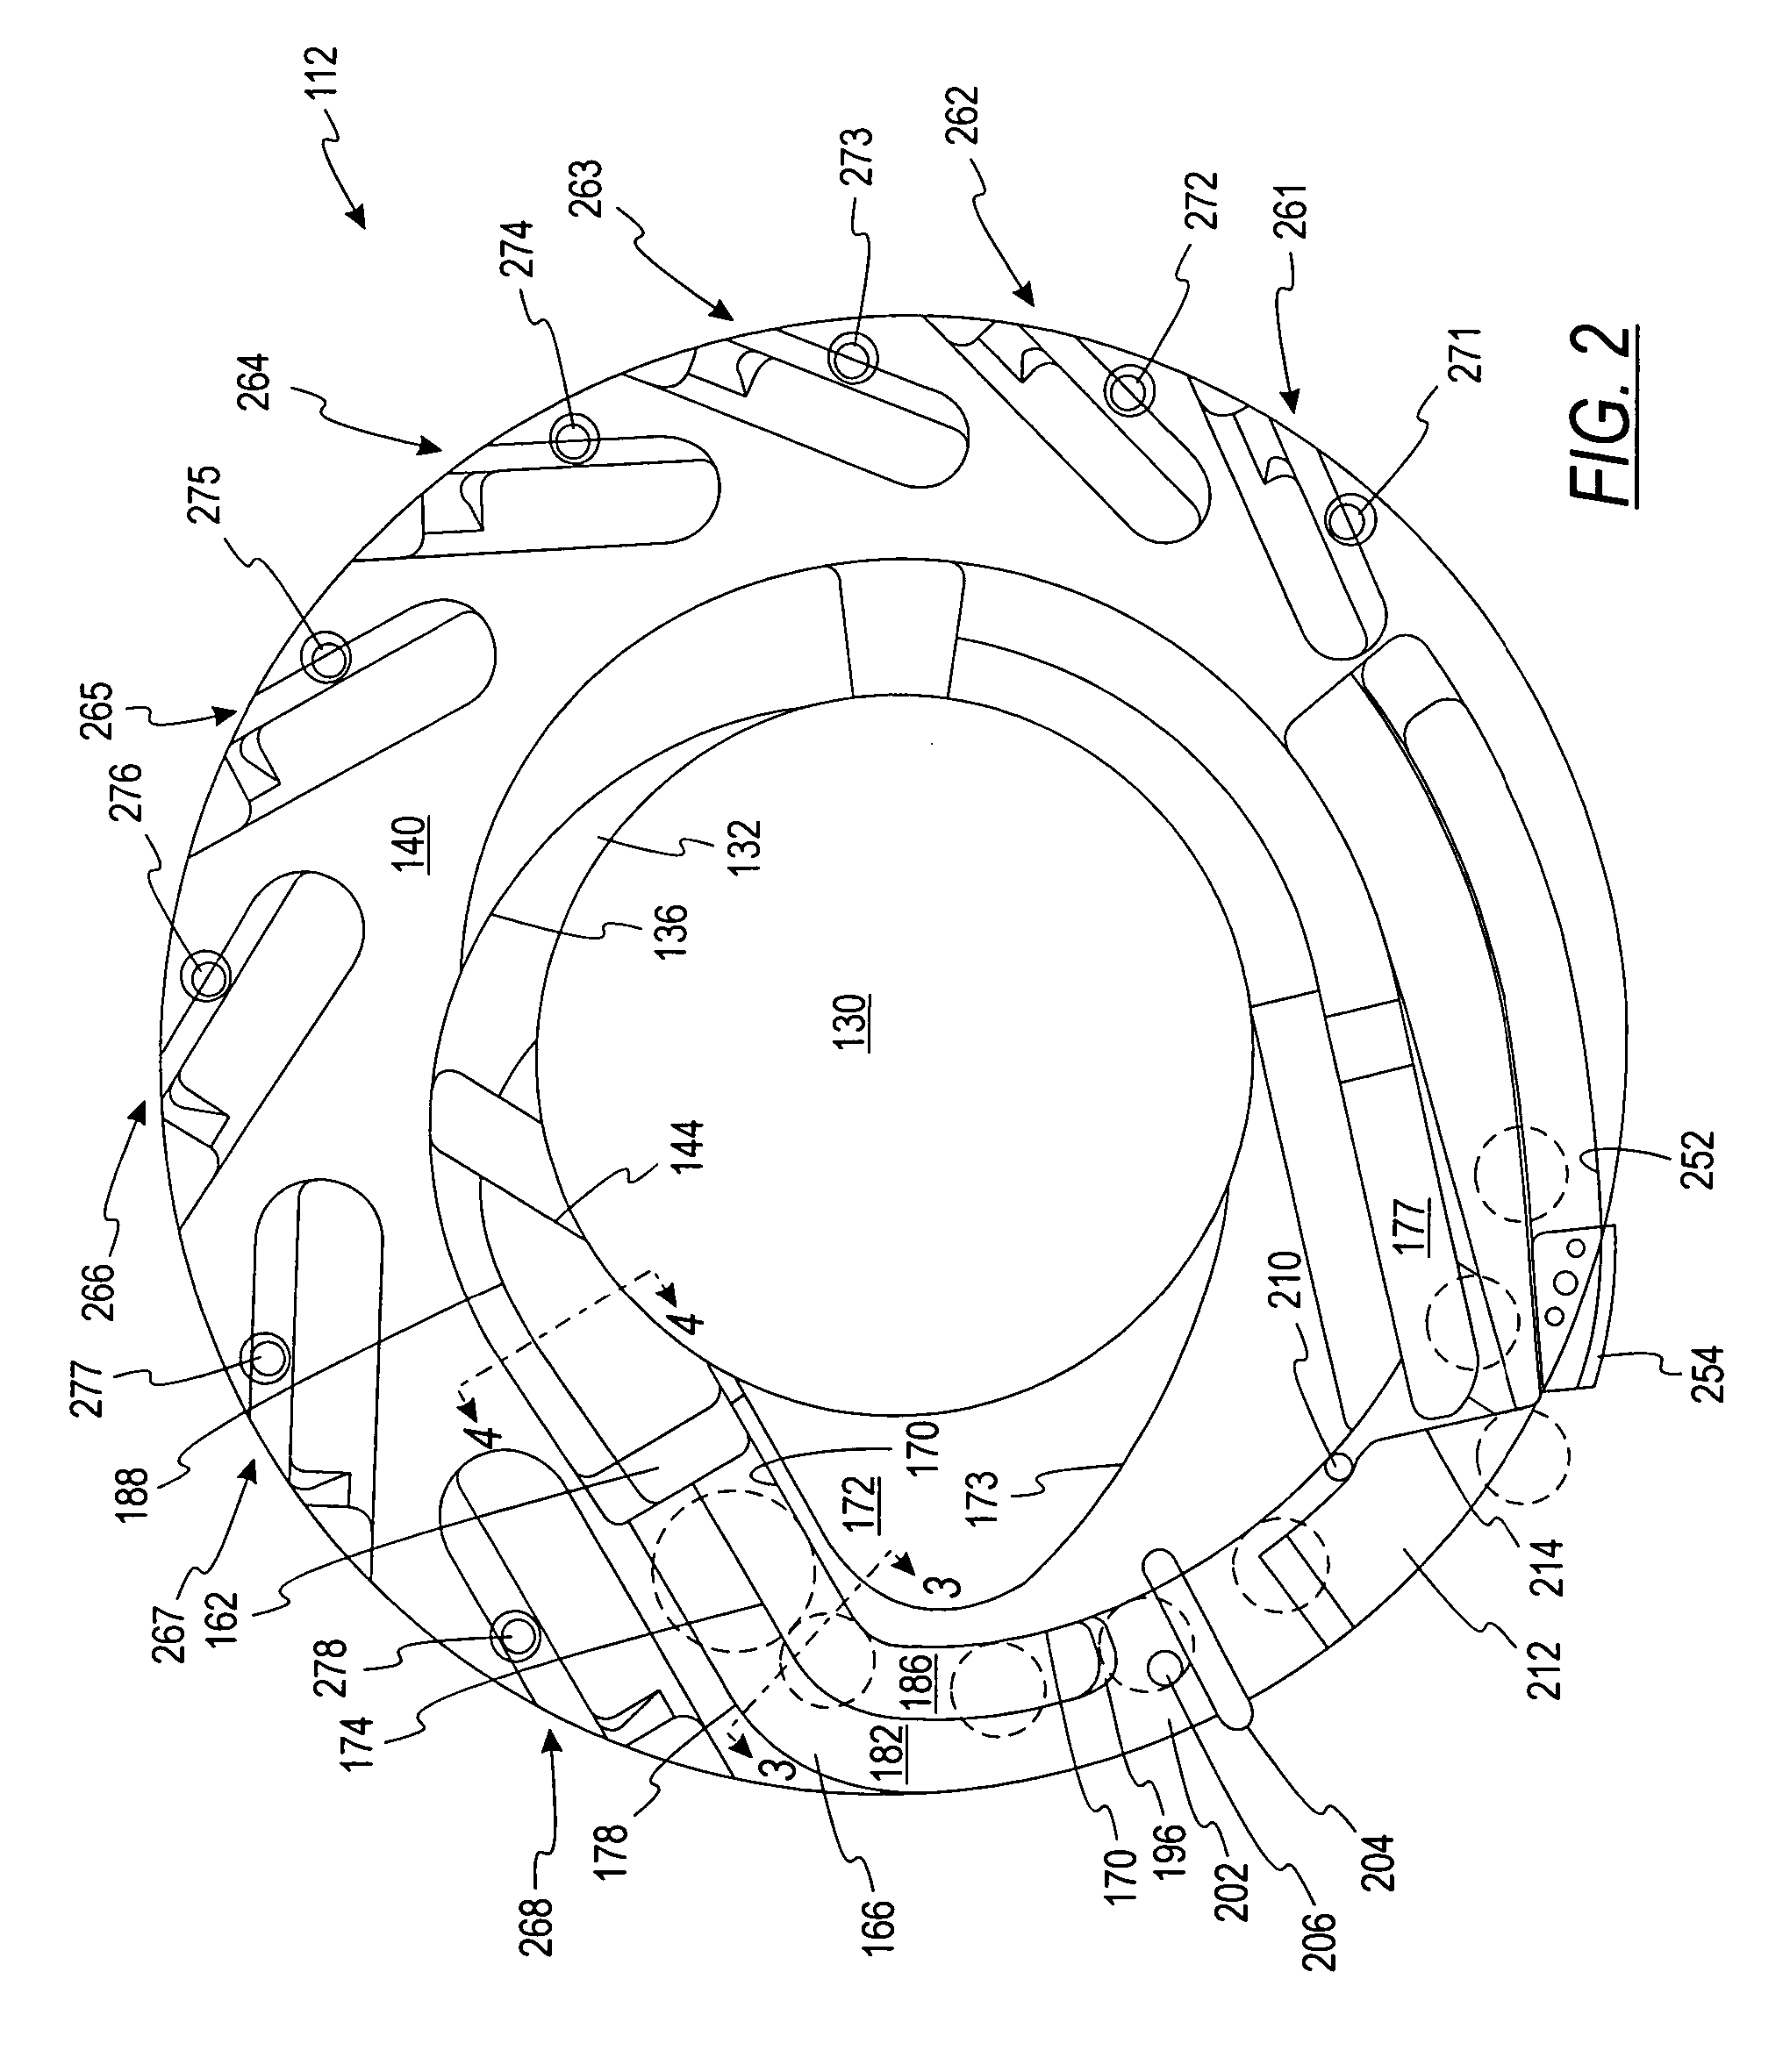 Disc-type coin processing device having improved coin discrimination system